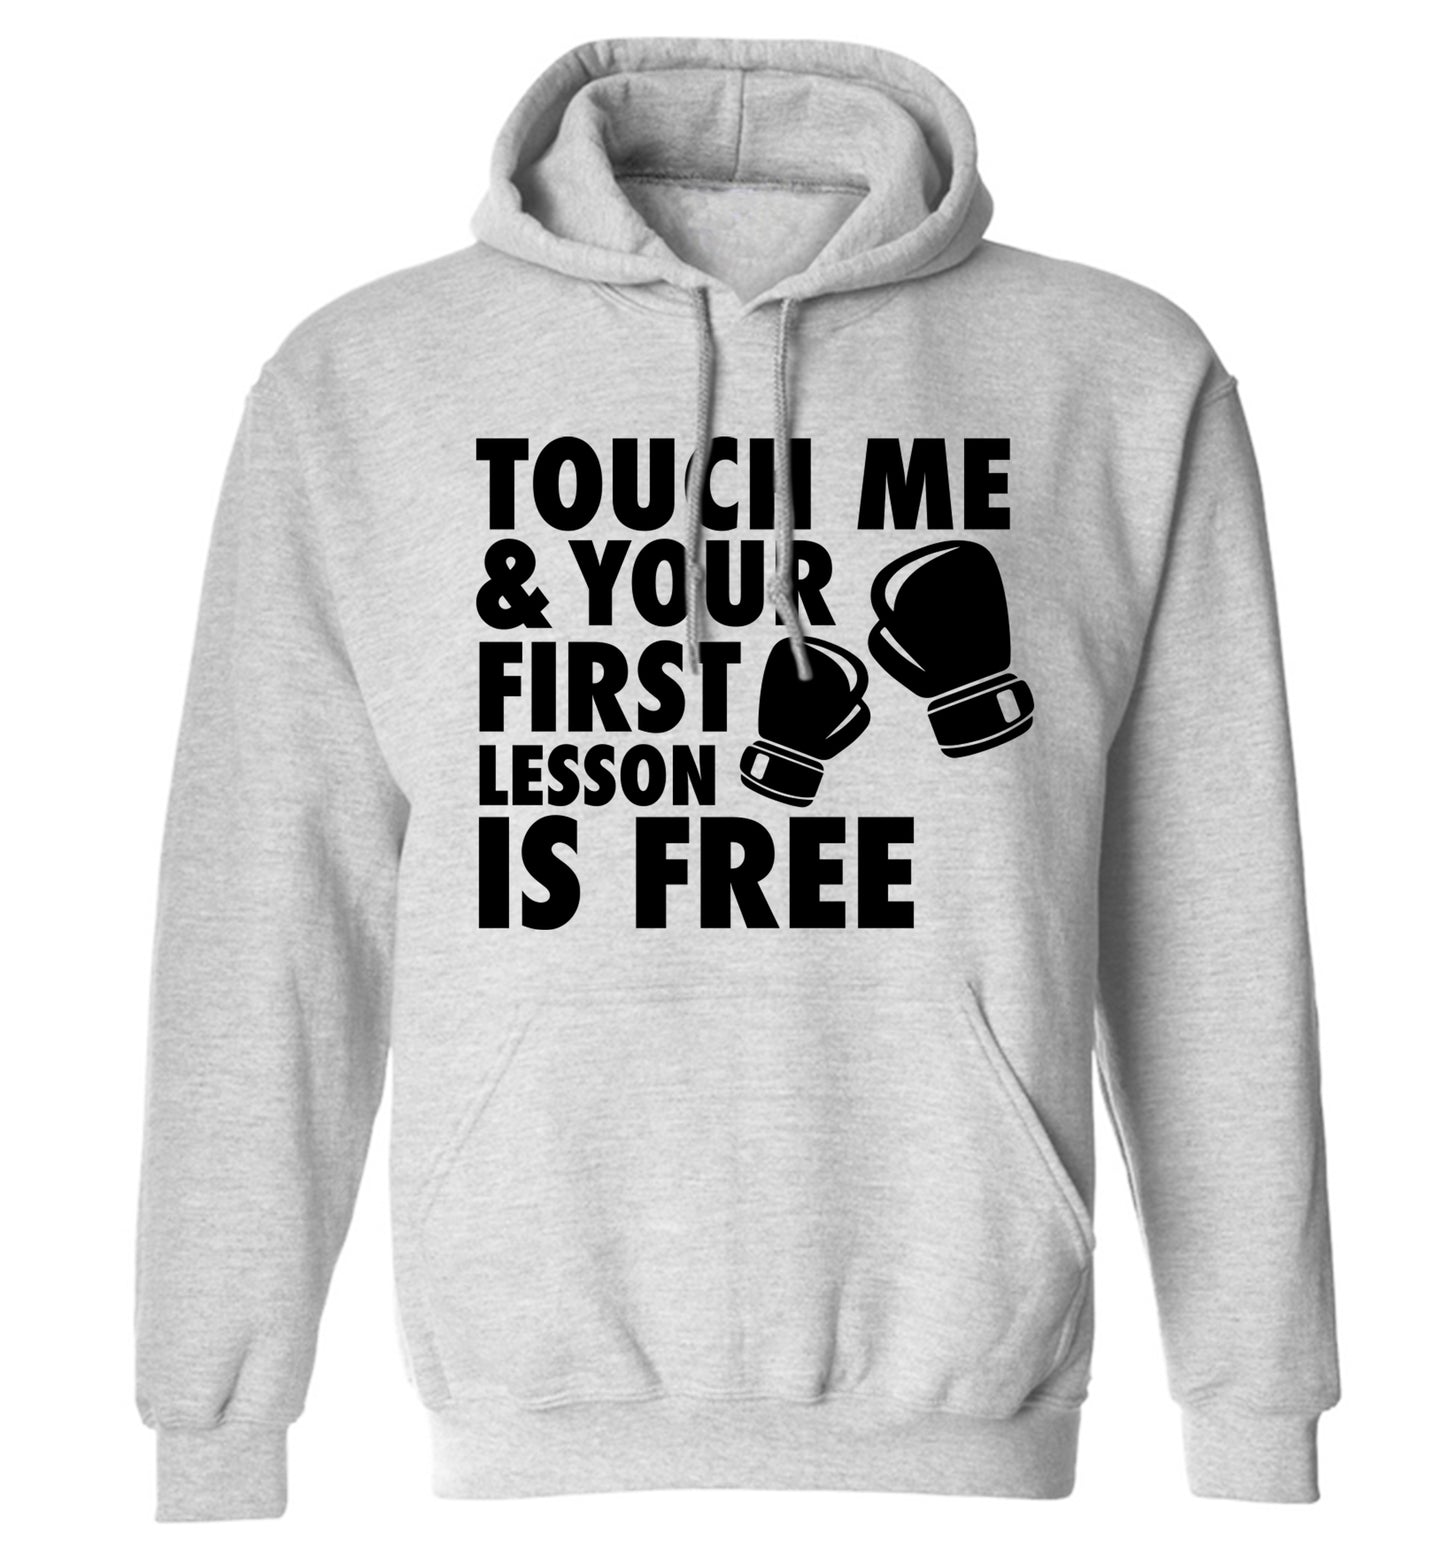 Touch me and your First Lesson is Free  adults unisex grey hoodie 2XL